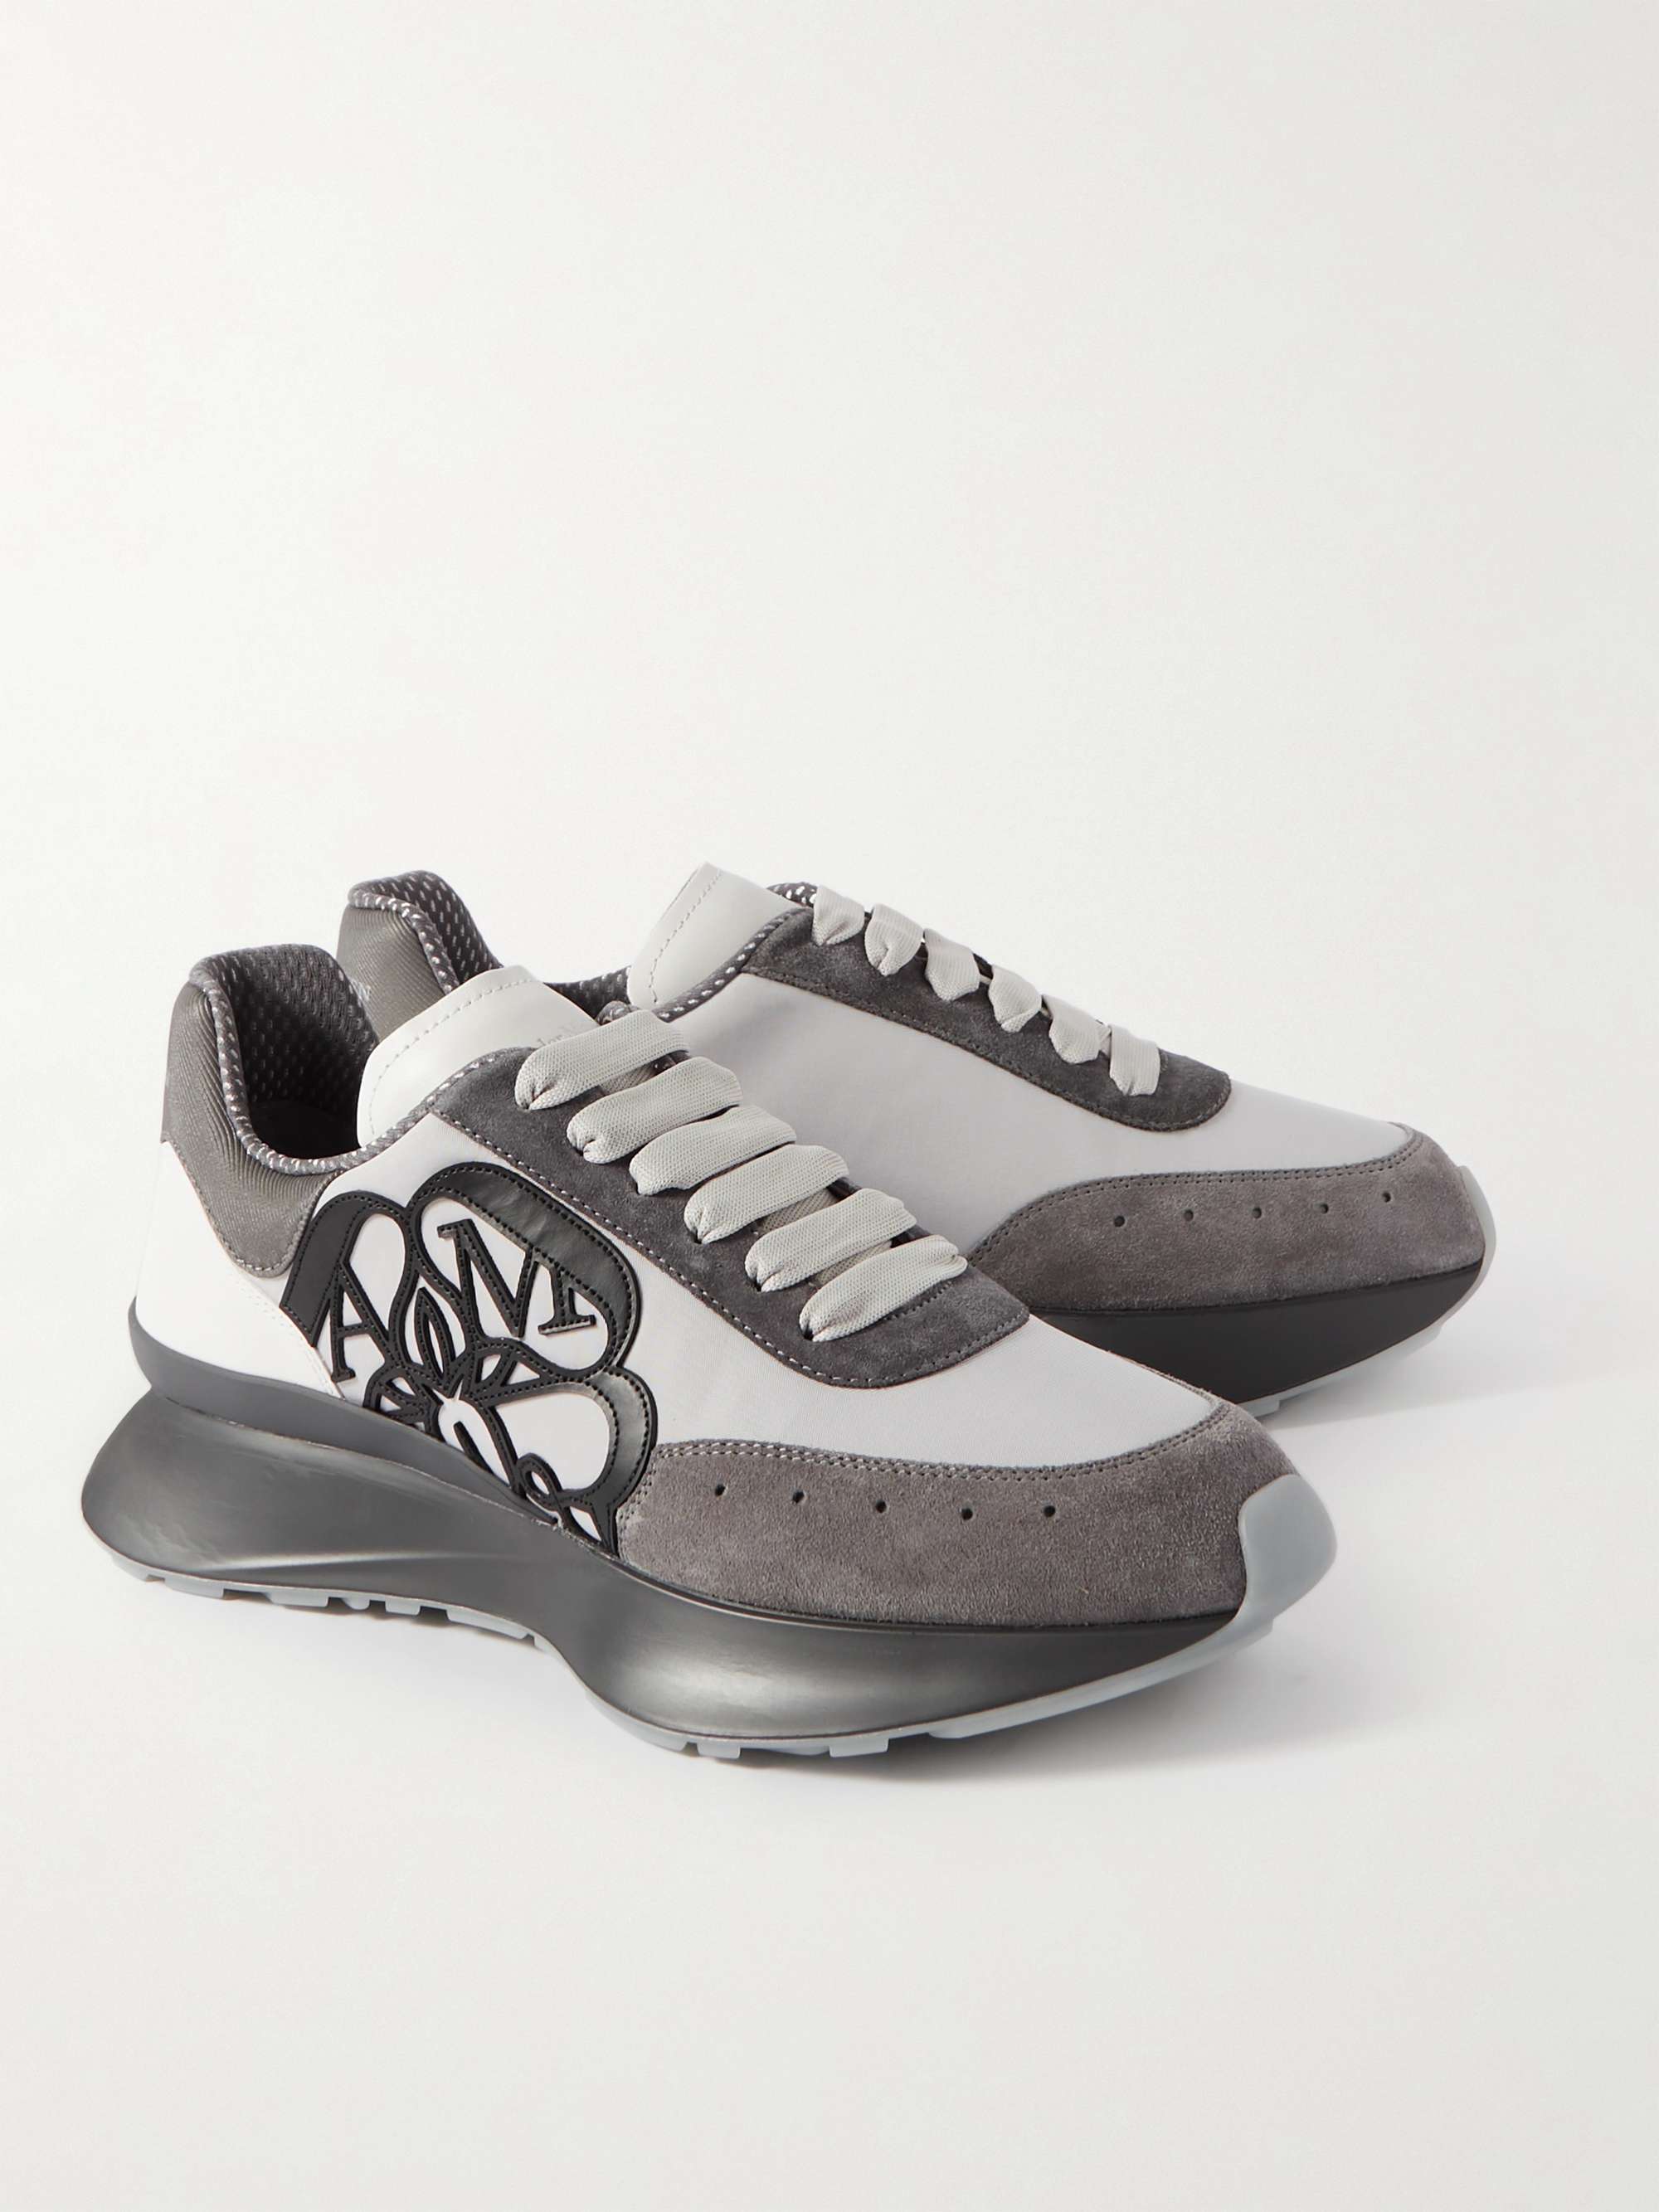 ALEXANDER MCQUEEN Sprint Runner Exaggerated-Sole Appliquéd Satin, Leather and Suede Sneakers